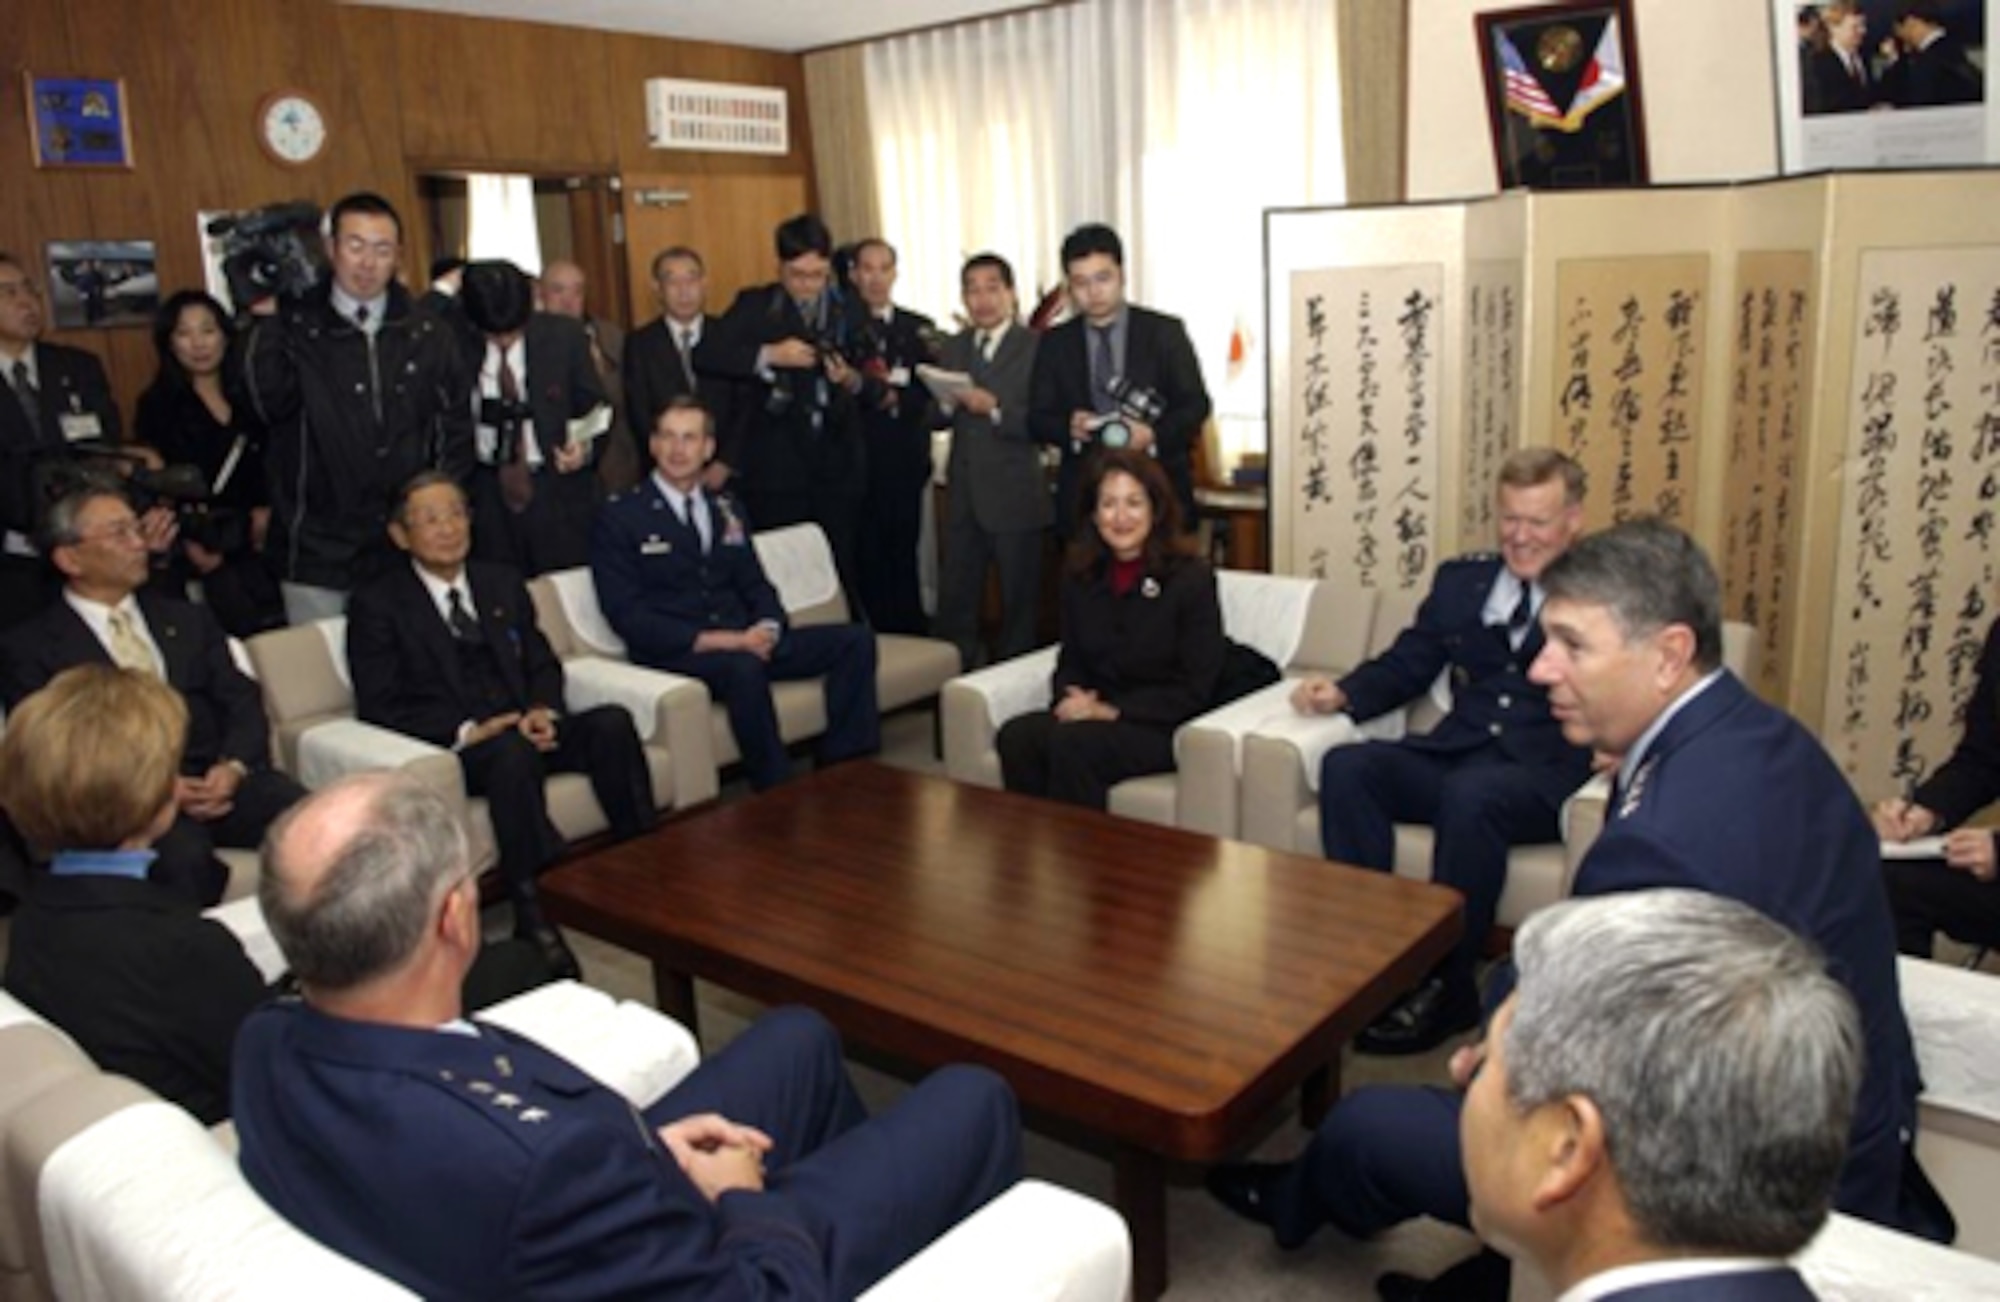 01/31/2007-- MISAWA CITY, Japan -- From left: Lt. Gen. Chip Utterback, 13th Air Force commander and his wife Sandy, Misawa City Vice Mayor Yoshida,  Misawa City Mayor Shigeyoshi Suzuki, Col. Terrence O'Shaughnessy, 35th Fighter Wing commander, Mrs. Kerri Wright, Lt. Gen. Bruce Wright, 5th Air Force and United States Forces Japan commander, and Gen. Paul Hester, Pacific Air Forces commander, gather at the mayor's office to share memories of their time serving as wing commanders at Misawa Air Base. (U.S. Air Force photo by Senior Airman Robert Barnett)